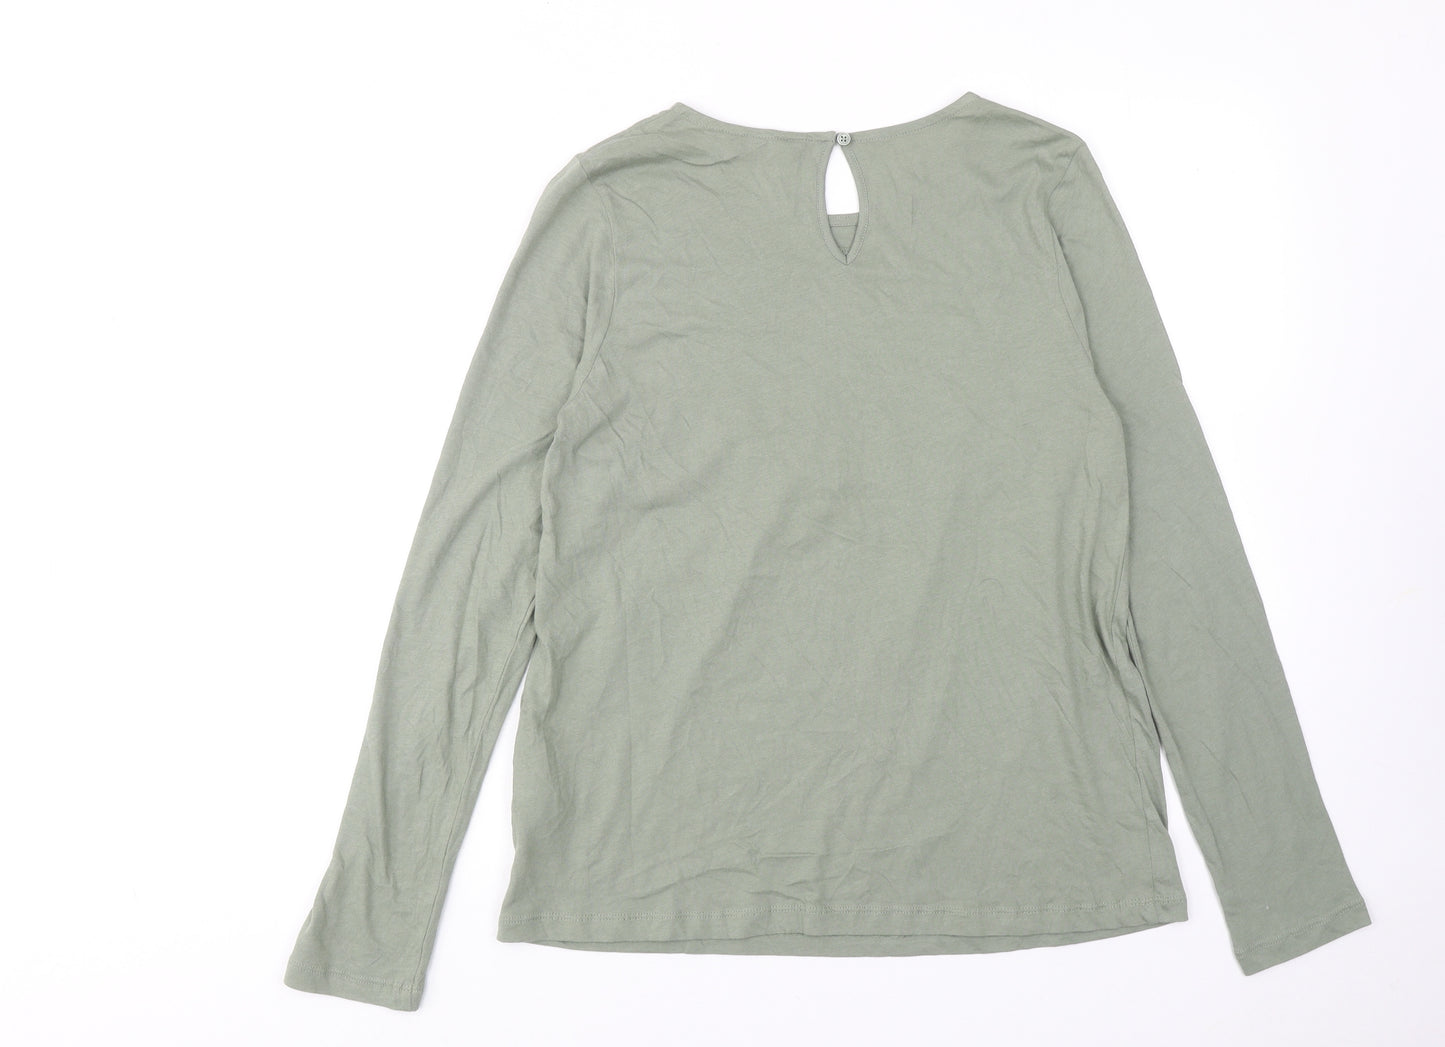 Marks and Spencer Womens Green Cotton Basic T-Shirt Size 6 Round Neck